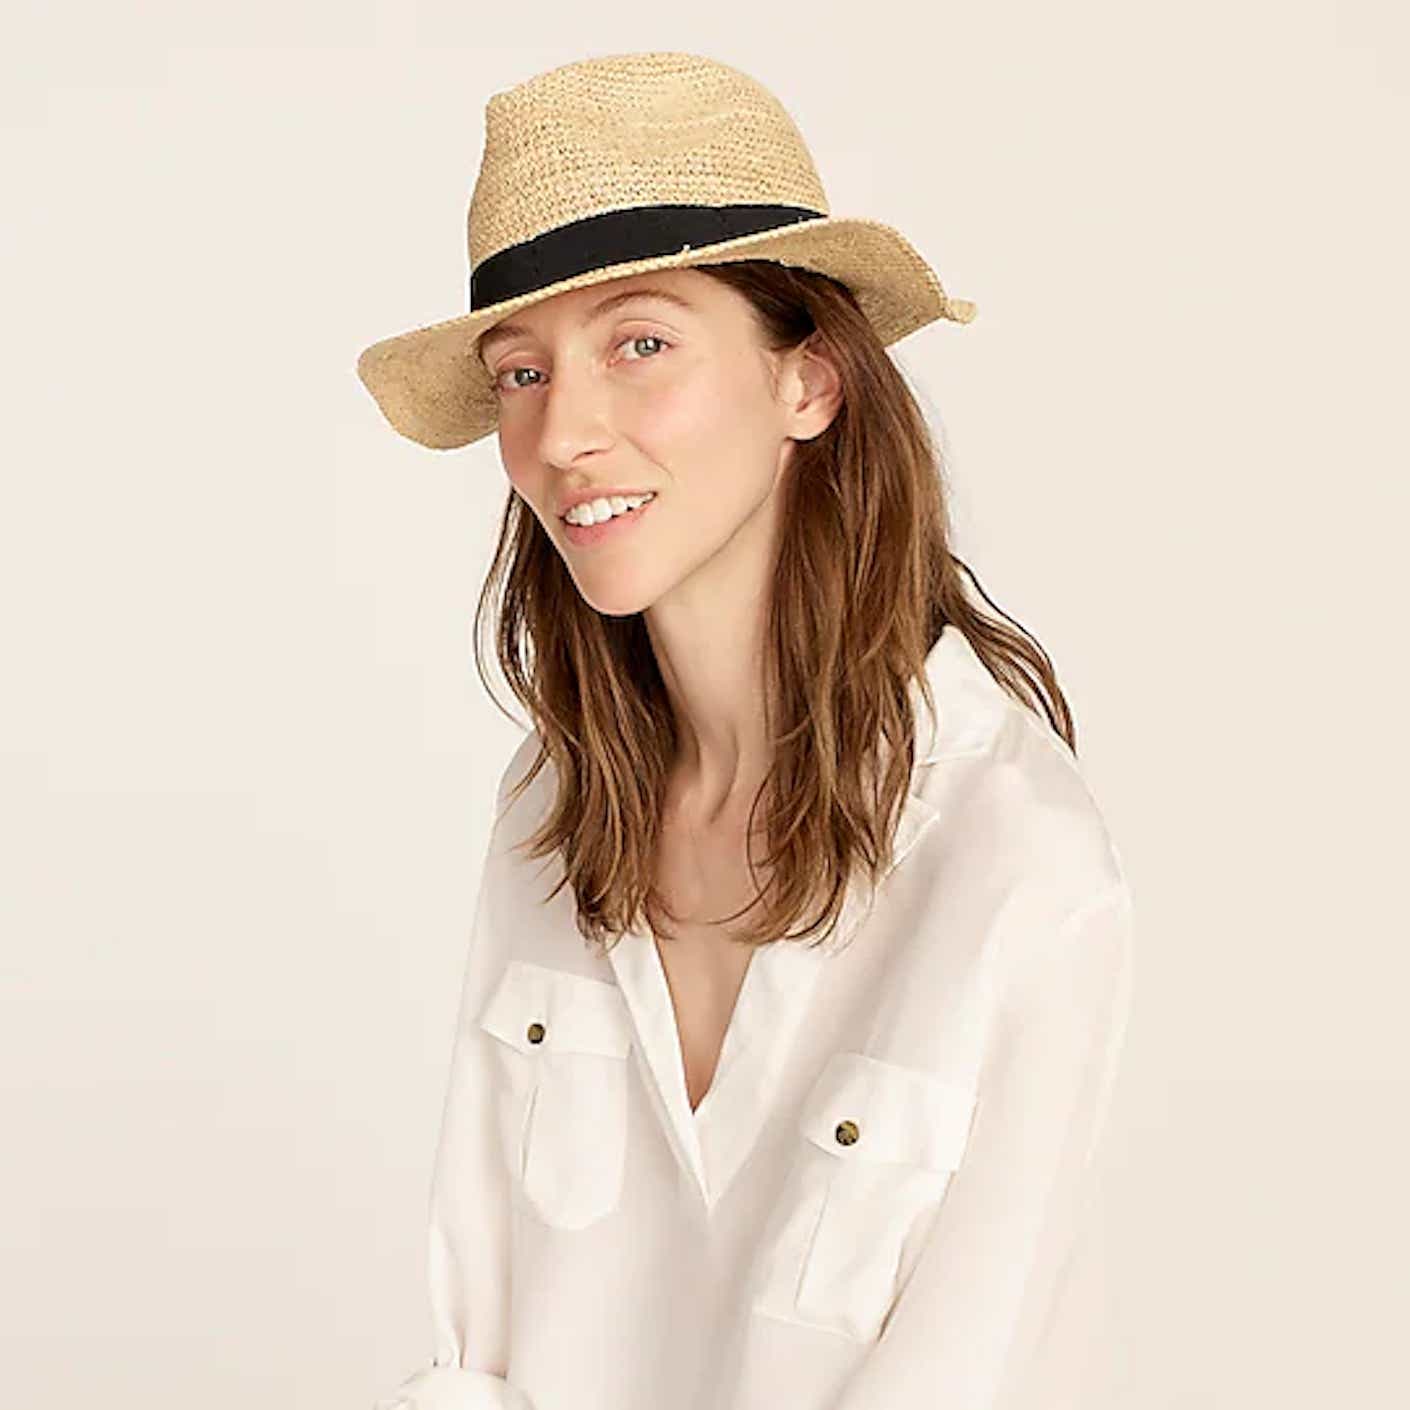 A woman wears a light, straw floppy hat with a medium brim and black band.